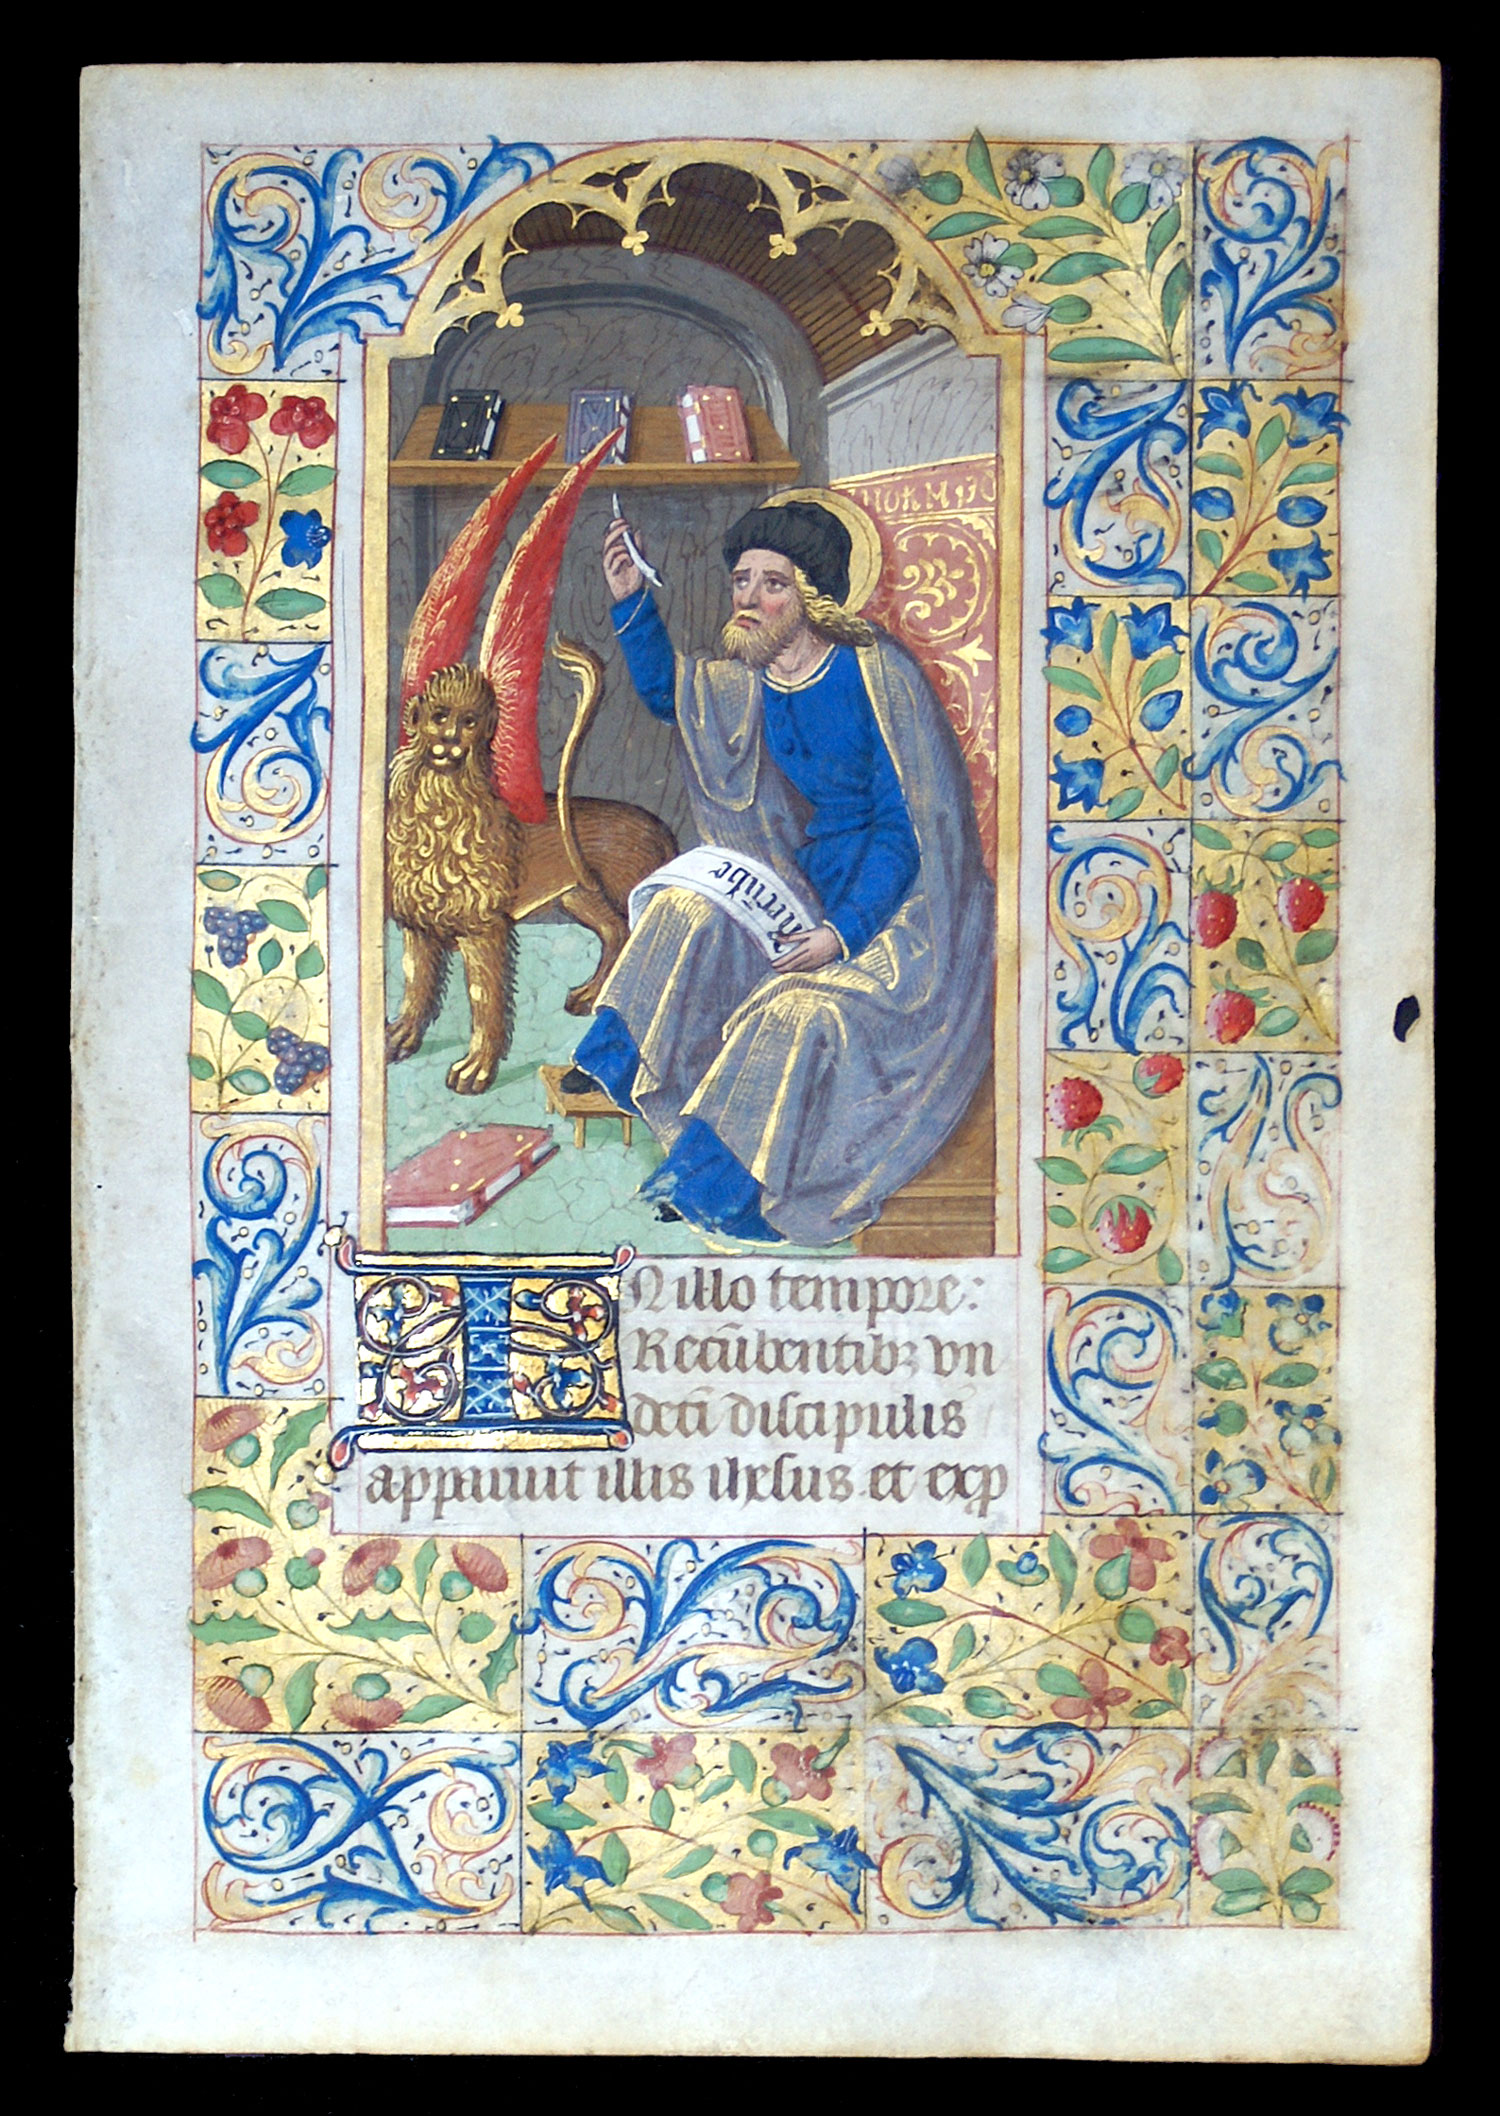 An exceptional Book of Hours Leaf - c 1480 - St Mark